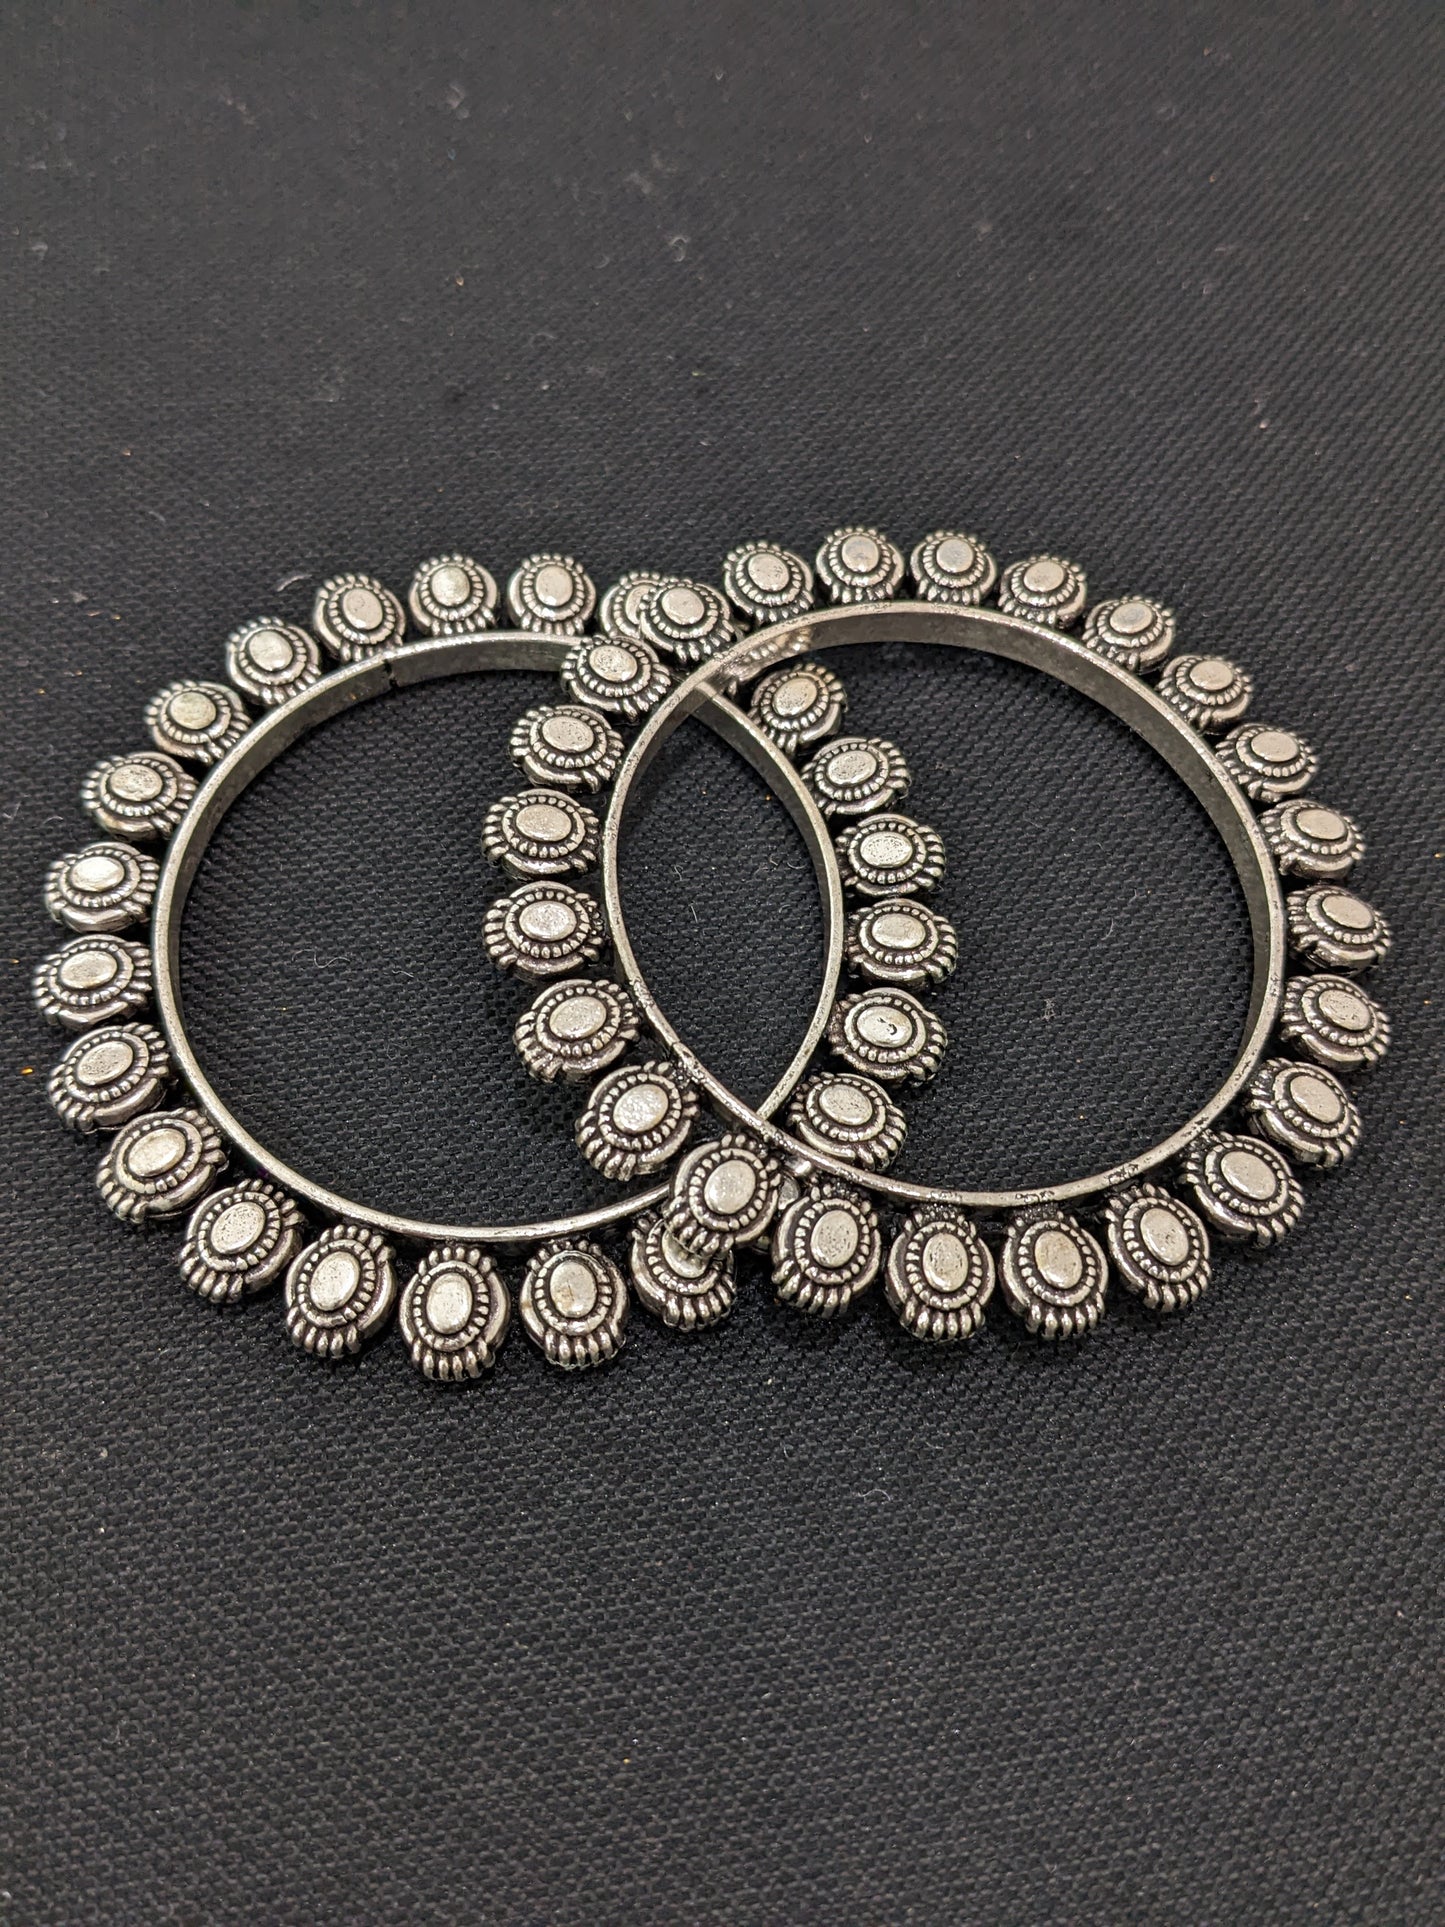 Oxidized silver pair bangles - Oval design